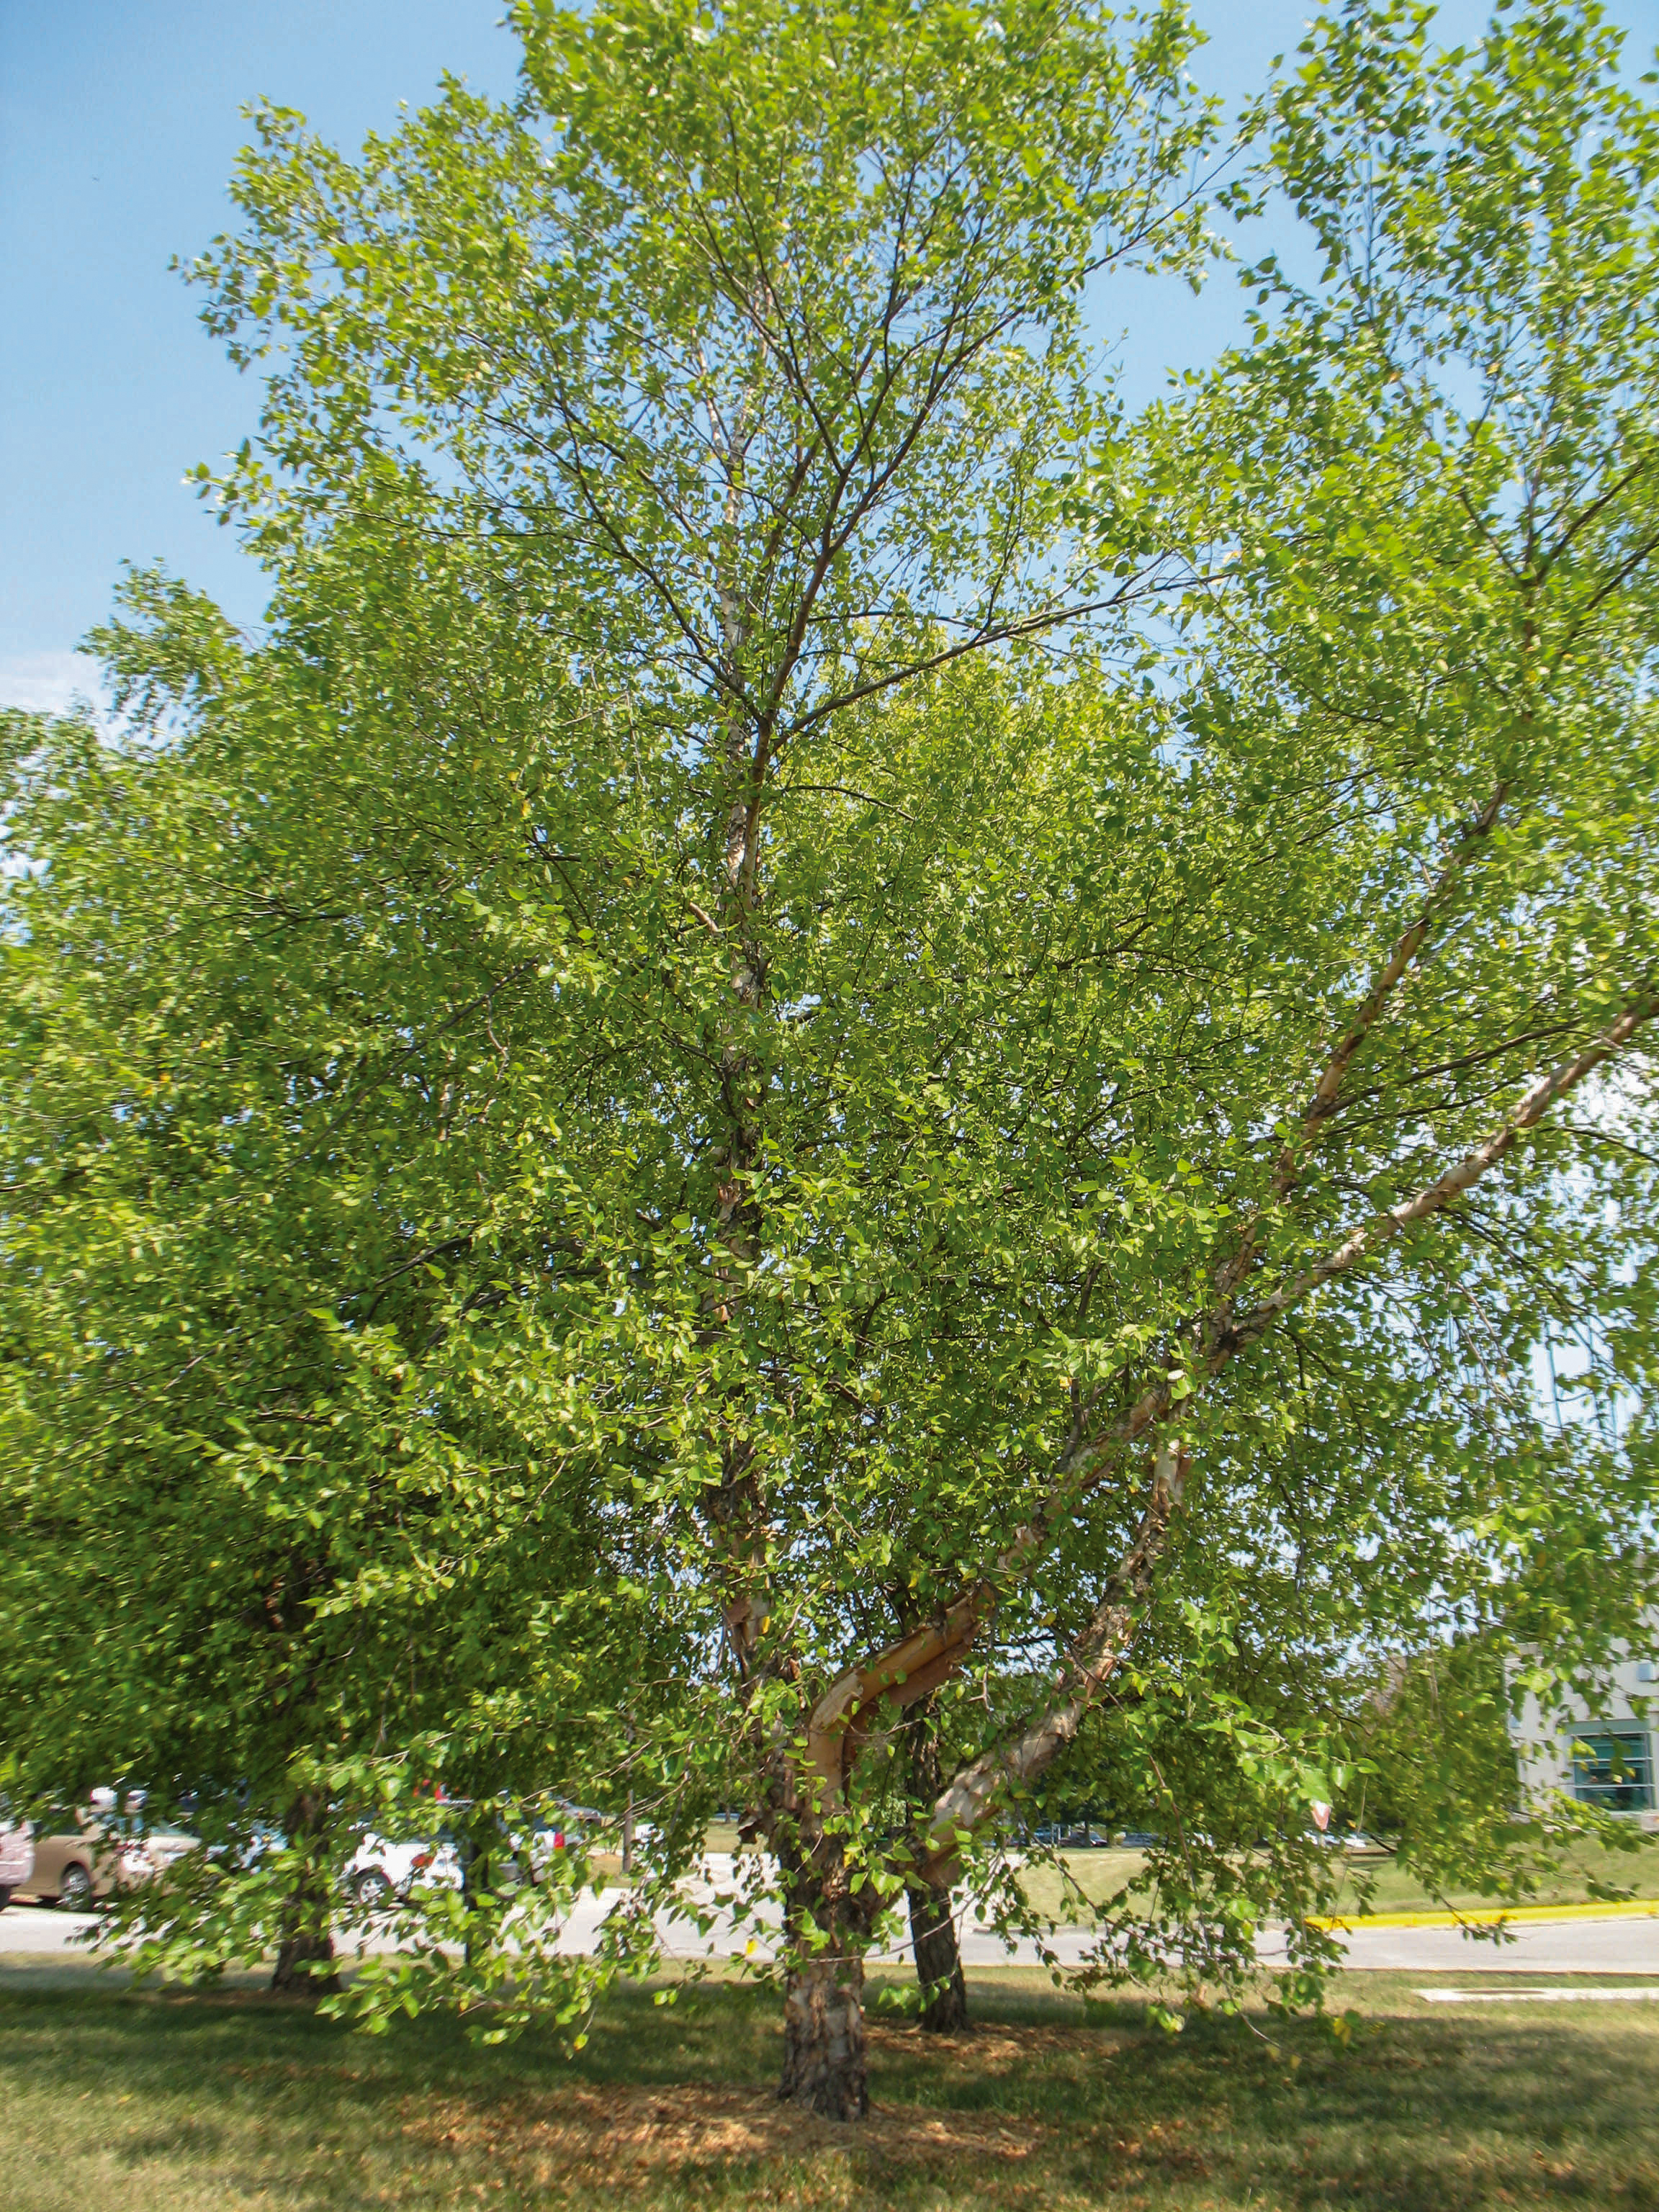 How to identify a river birch and other Iowa trees | Iowa DNR